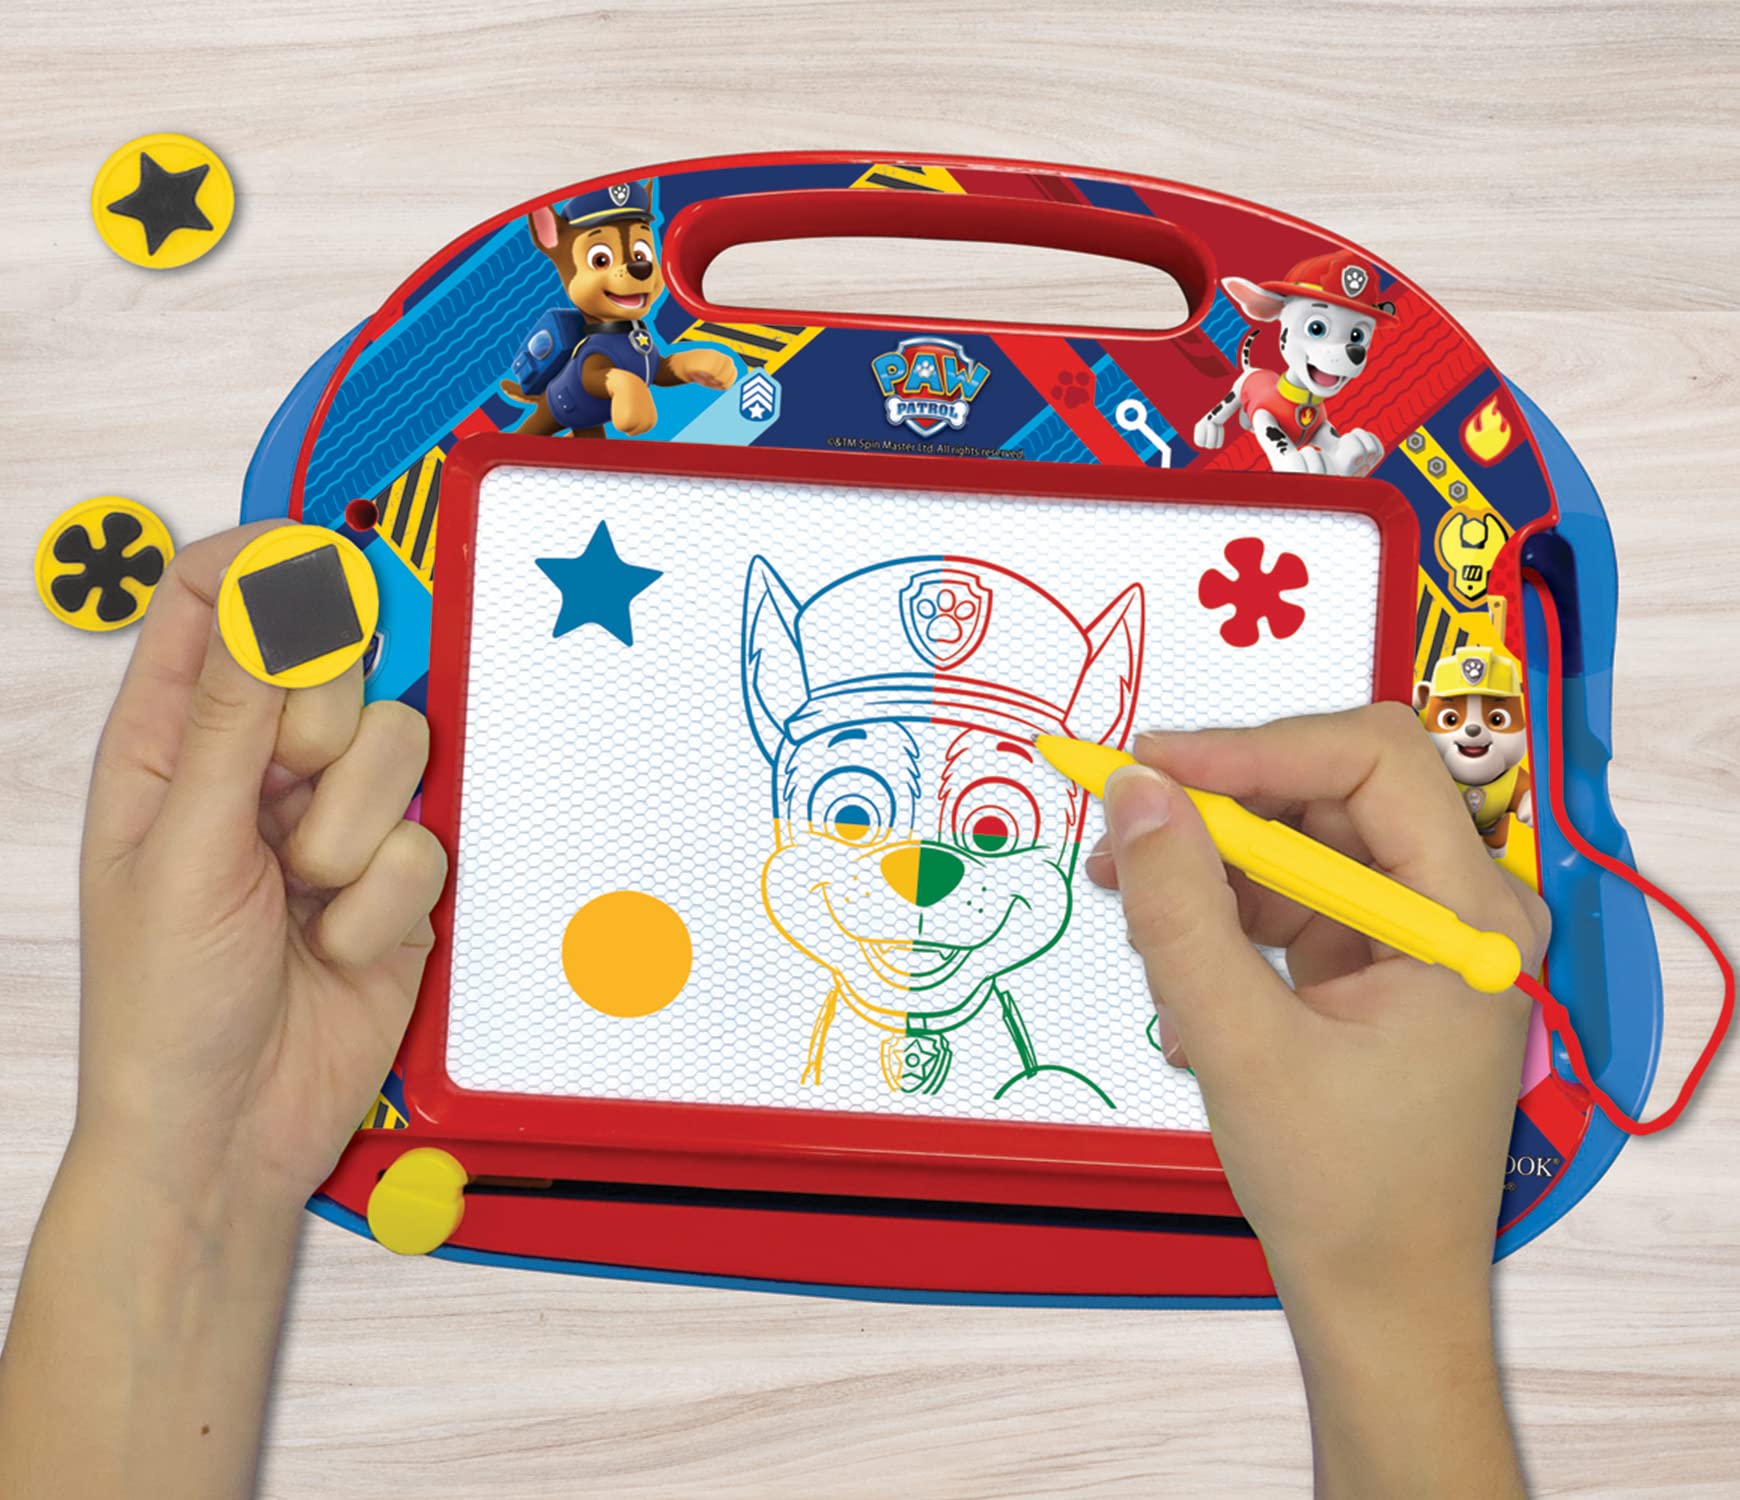 LEXIBOOK CRPA550 Multicolor Magic Magnetic Paw Patrol Drawing Board, Artistic Creative Toy for Girls and Boys, Stylus Pen and Stamps, Red/Blue